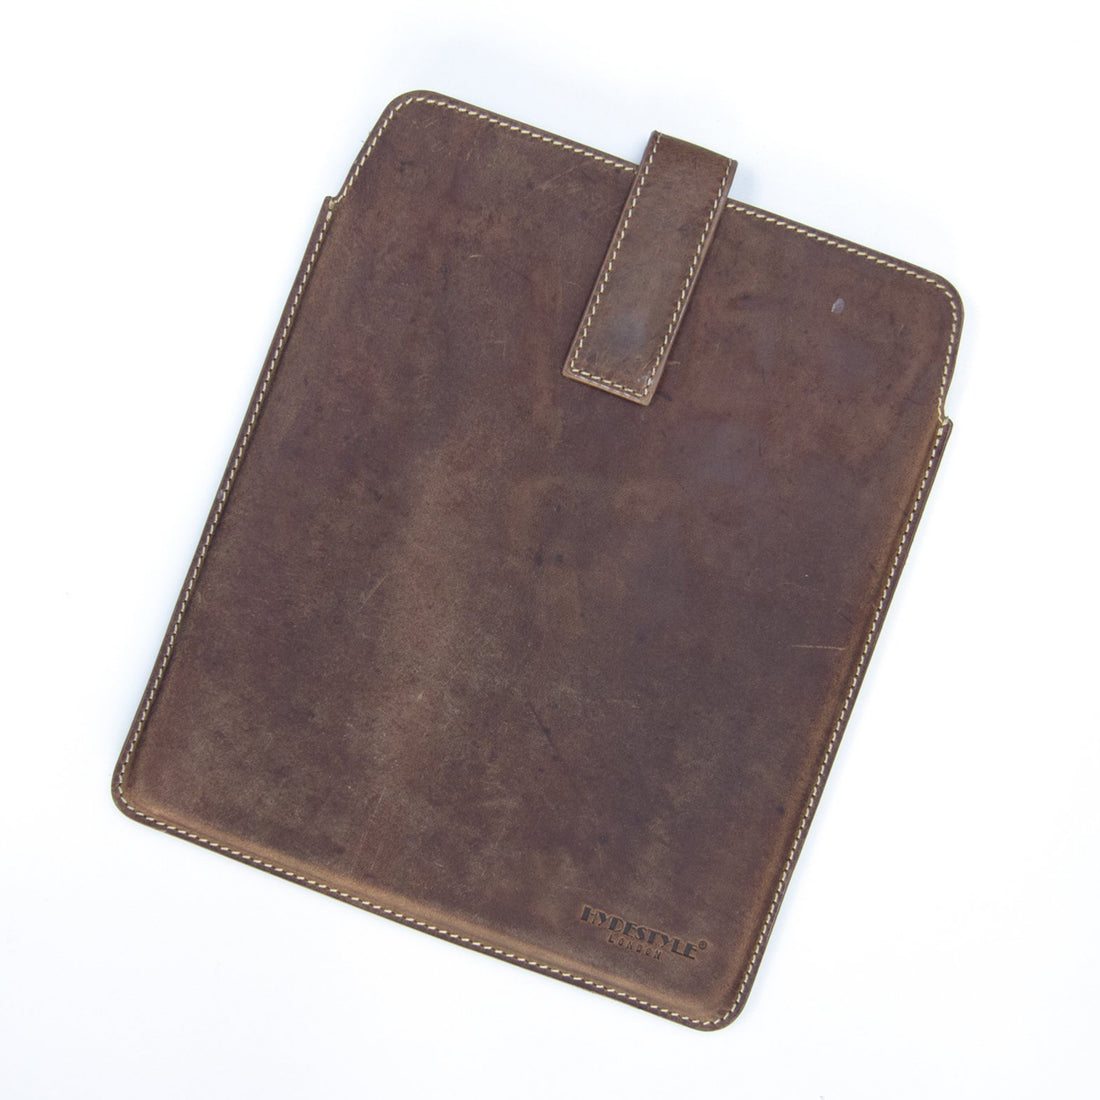 DISTRESSED BROWN LEATHER IPAD CASE